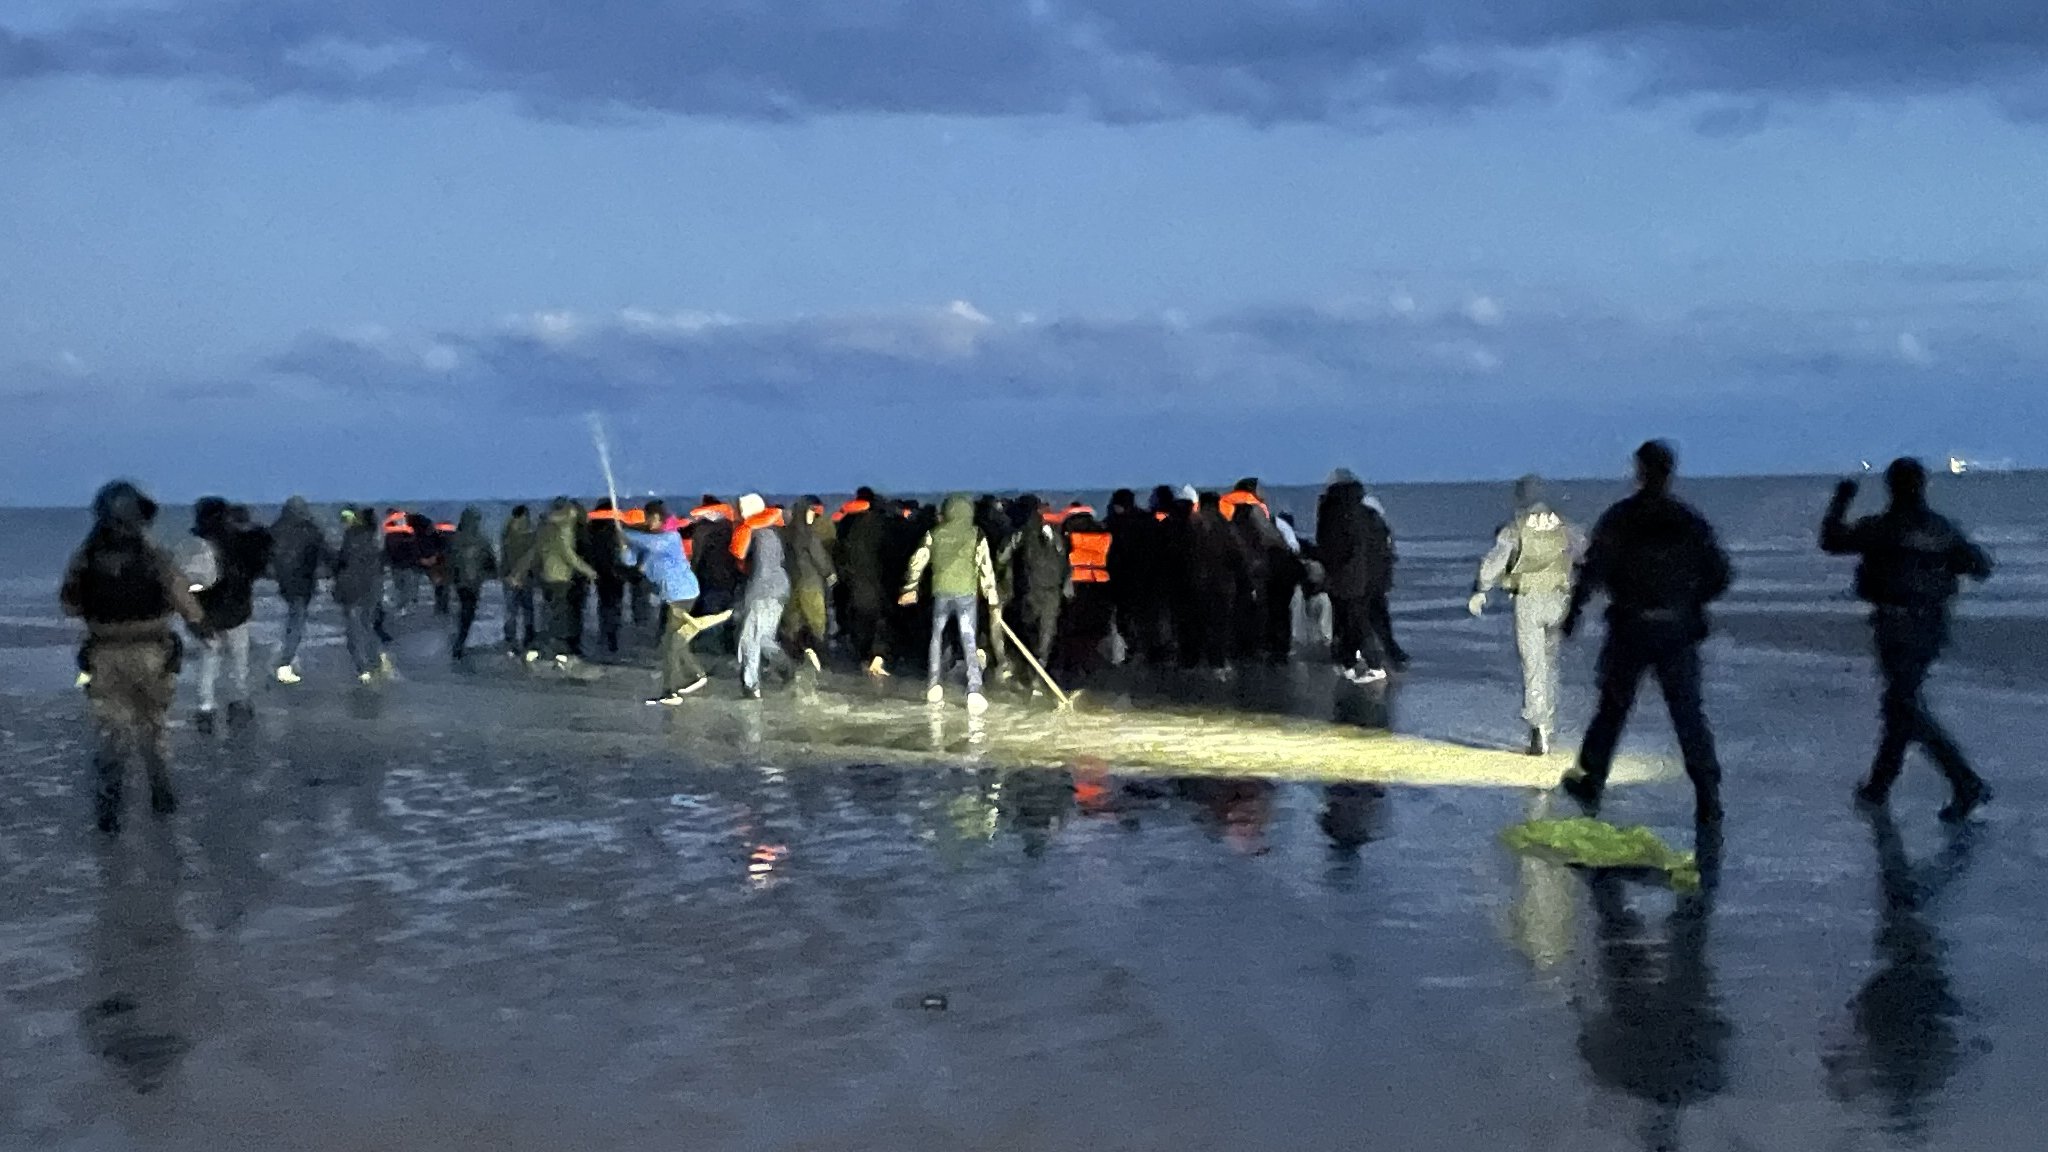 I want to get to England: BBC sees people struggling on migrant boat before five died